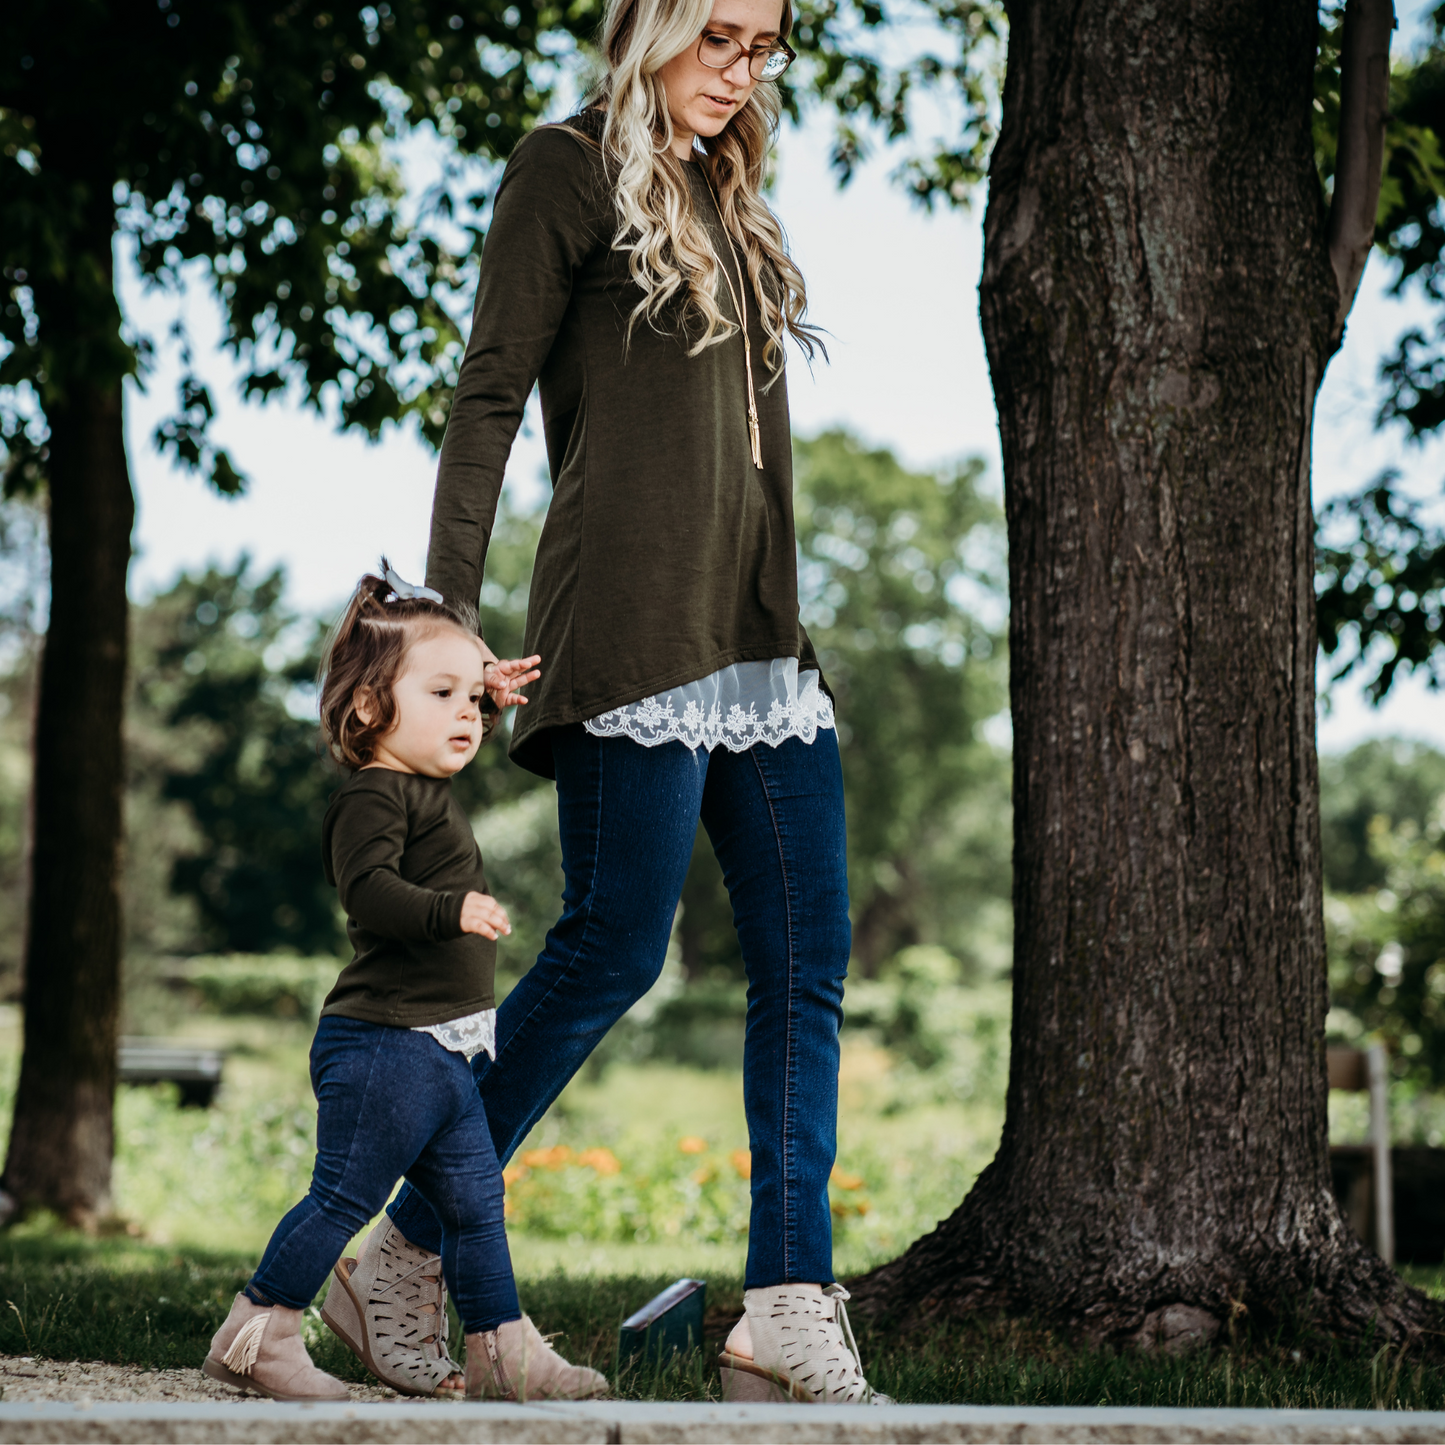 Olive Green Lace Mommy & Me Tops- Women's